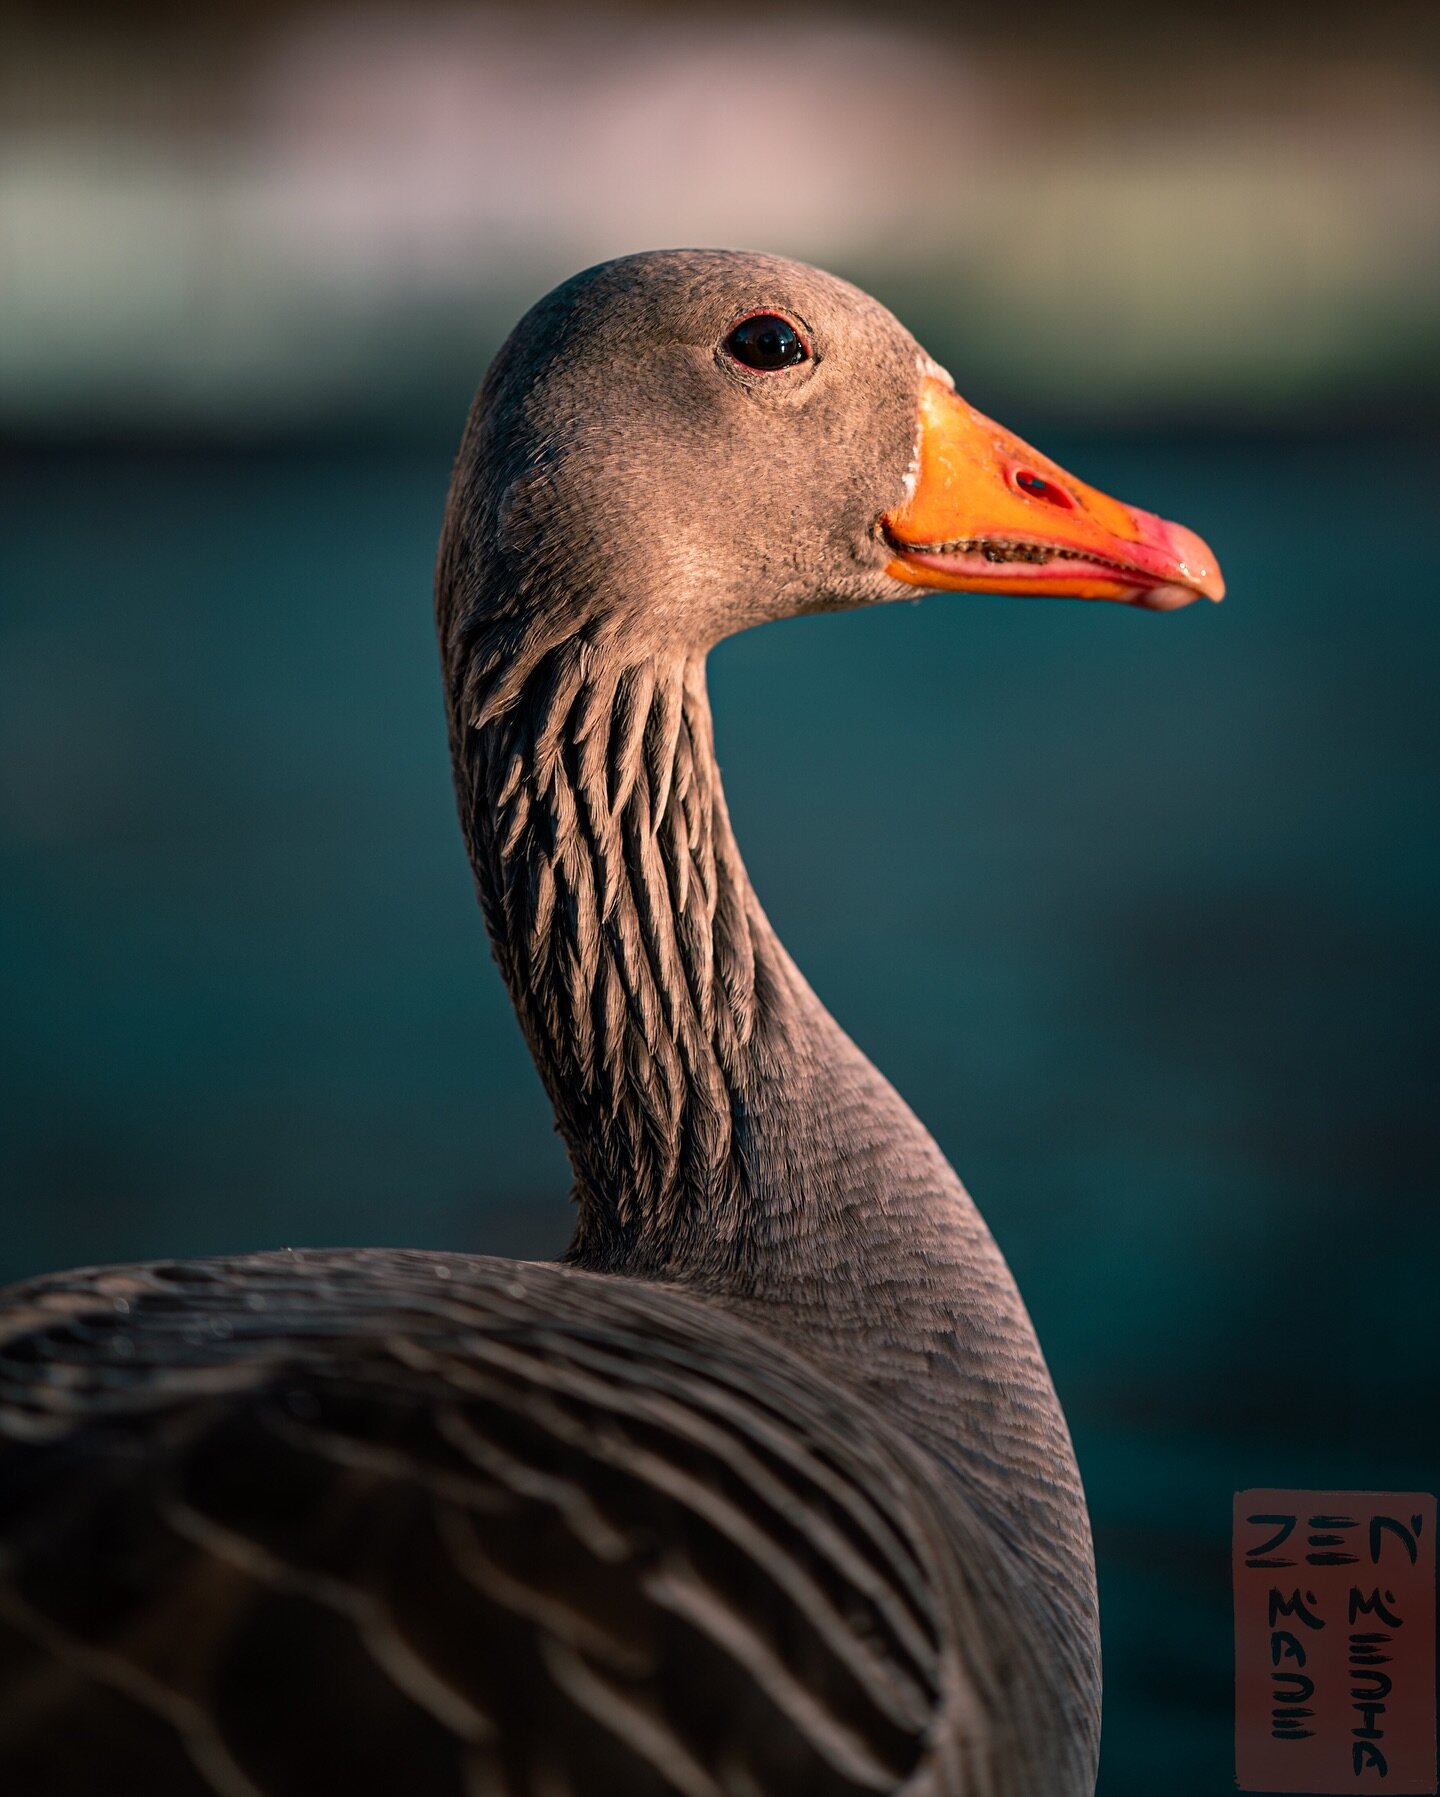 It&rsquo;s such an amazing thing when you can be close to wild animals and just be in their presence. The goose did not bother when I sat down next to him. Just 1m away and had the chance to snap some shots with my 85mm, such a perfect model.
*
#bird